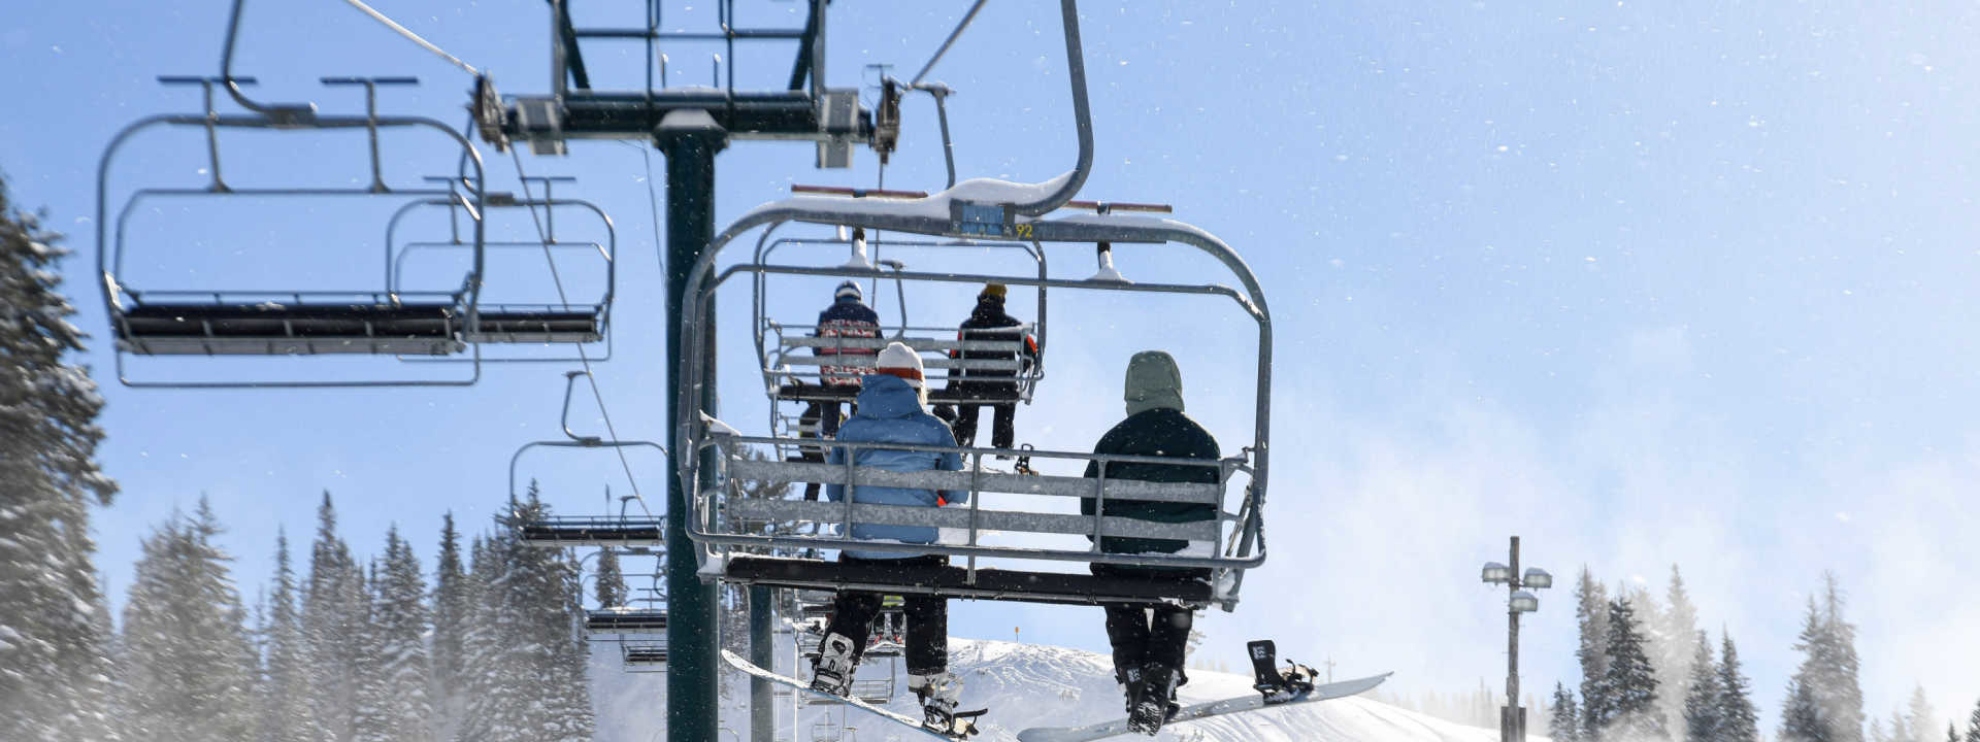 Friends on a lift together at Brighton Resort